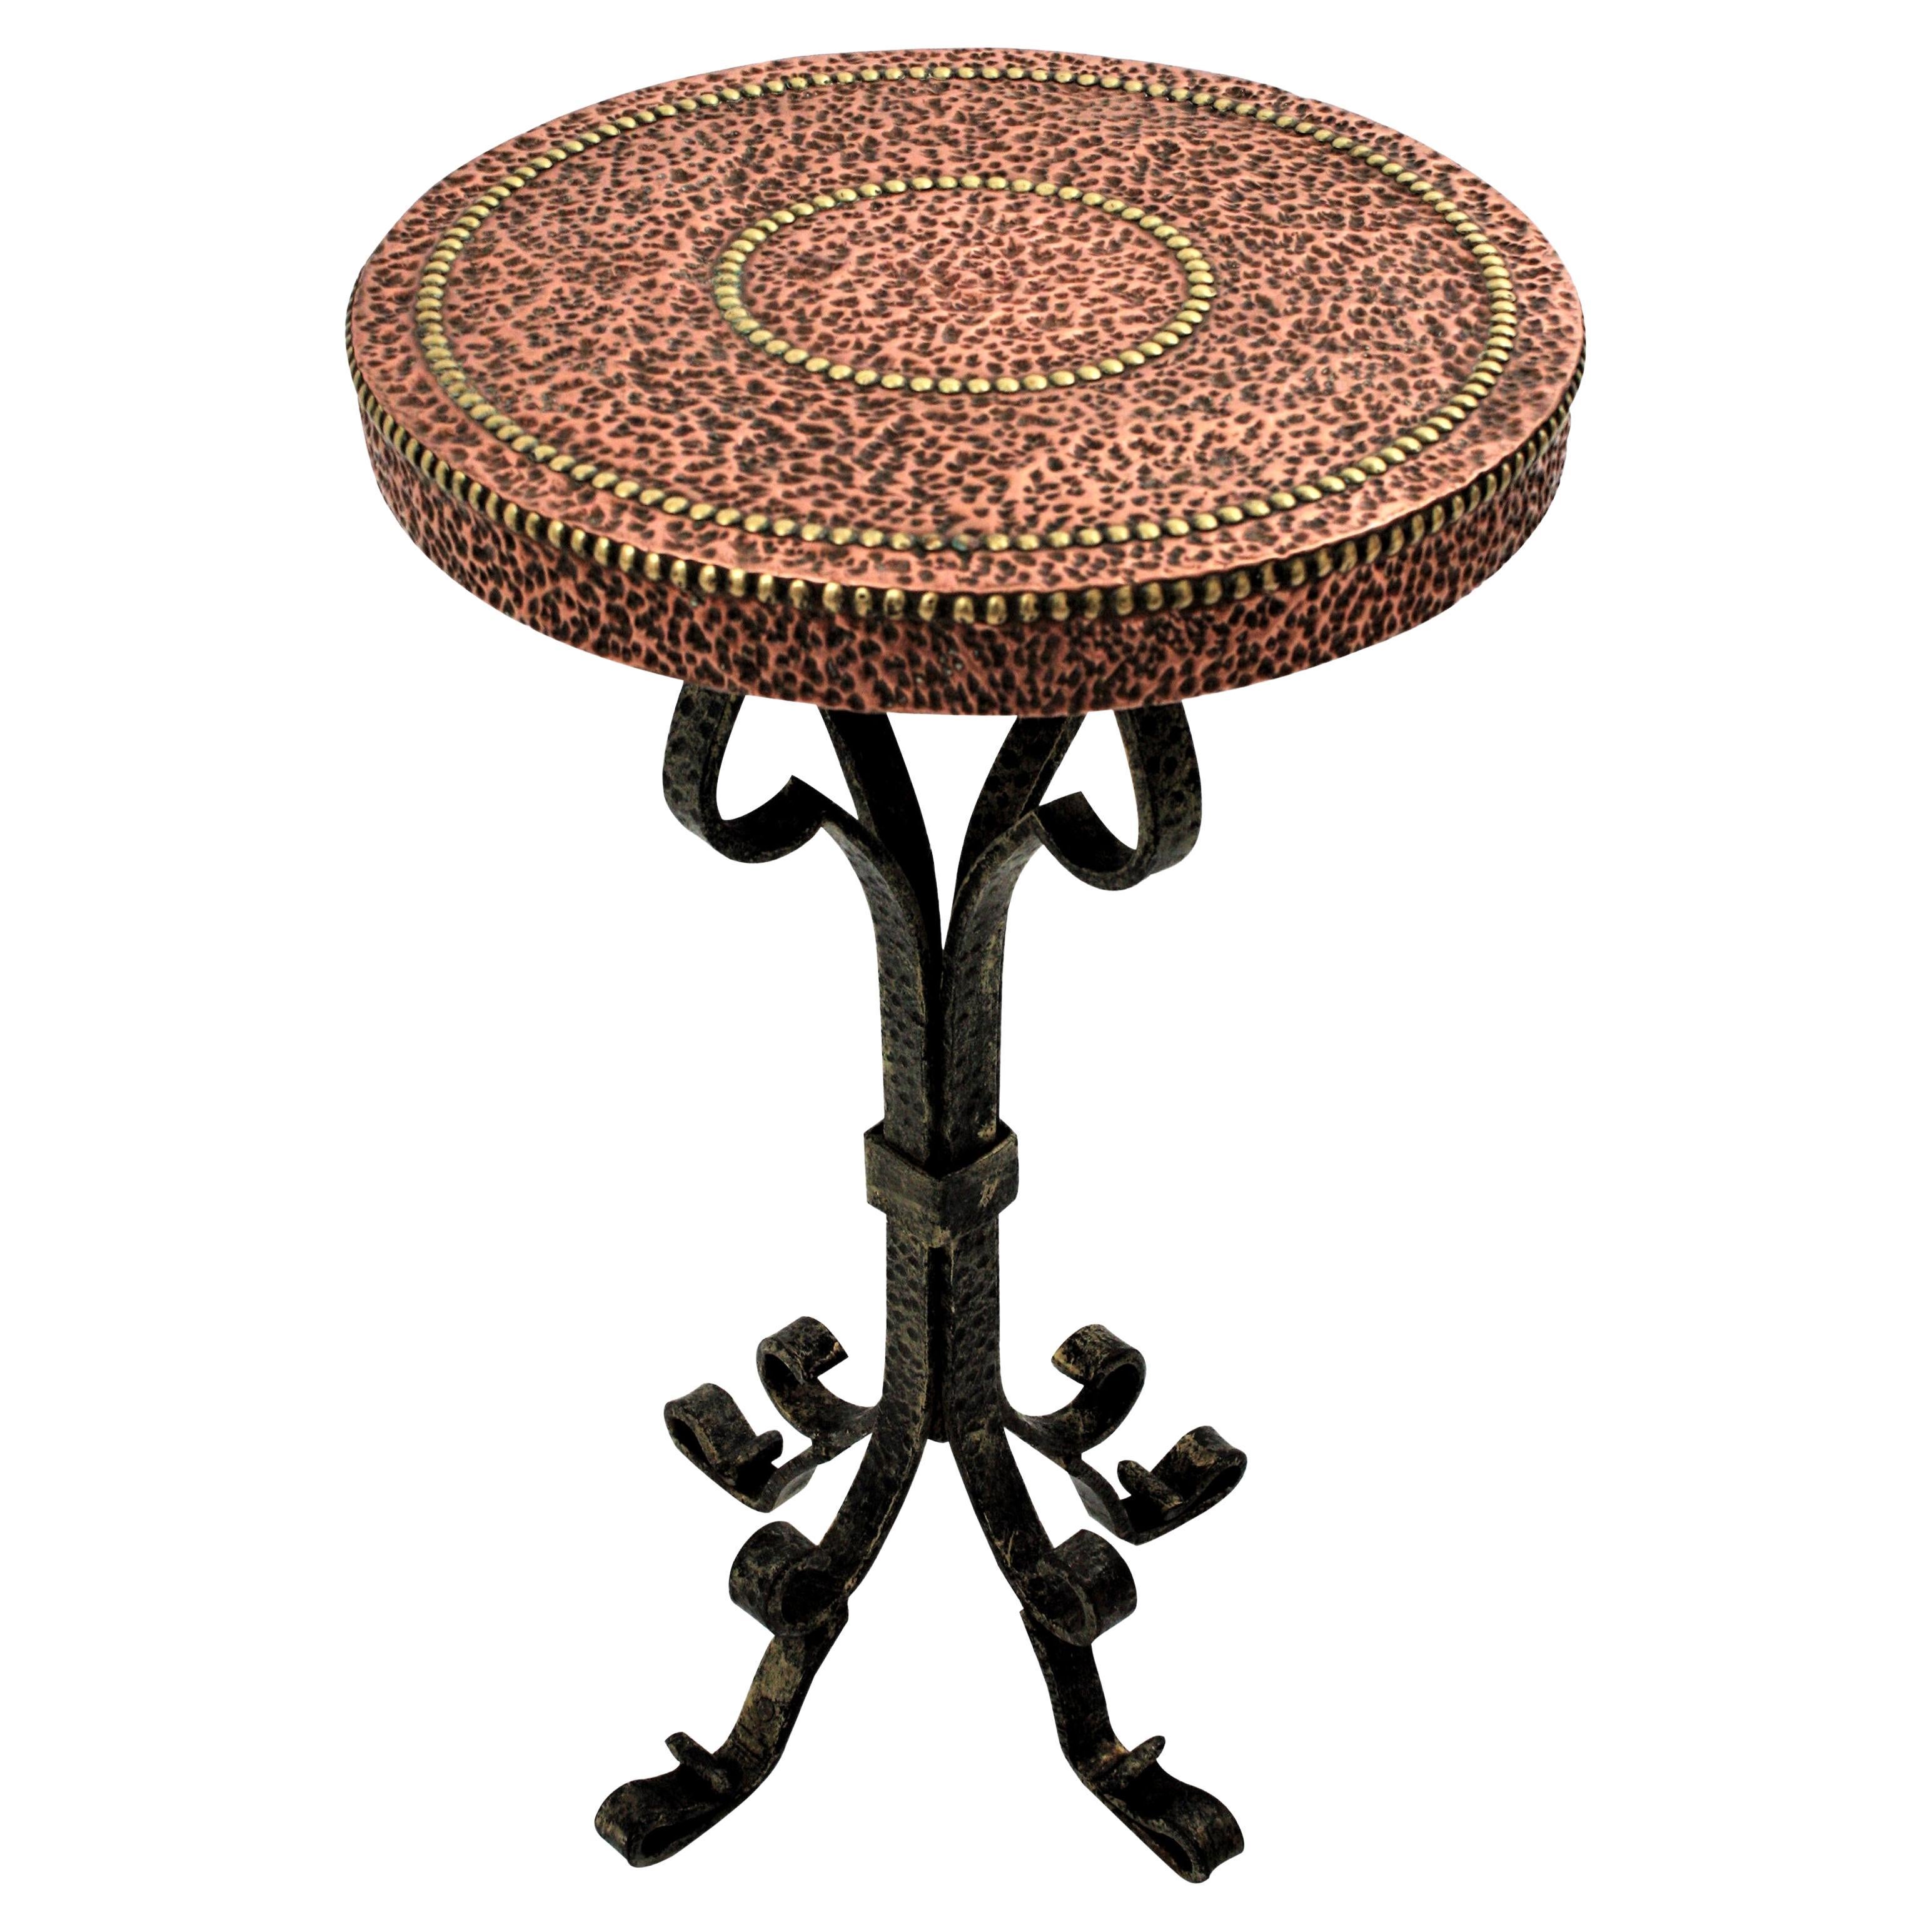 Spanish Drinks Table, Gueridon or Side Table in Wrought Iron and Copper